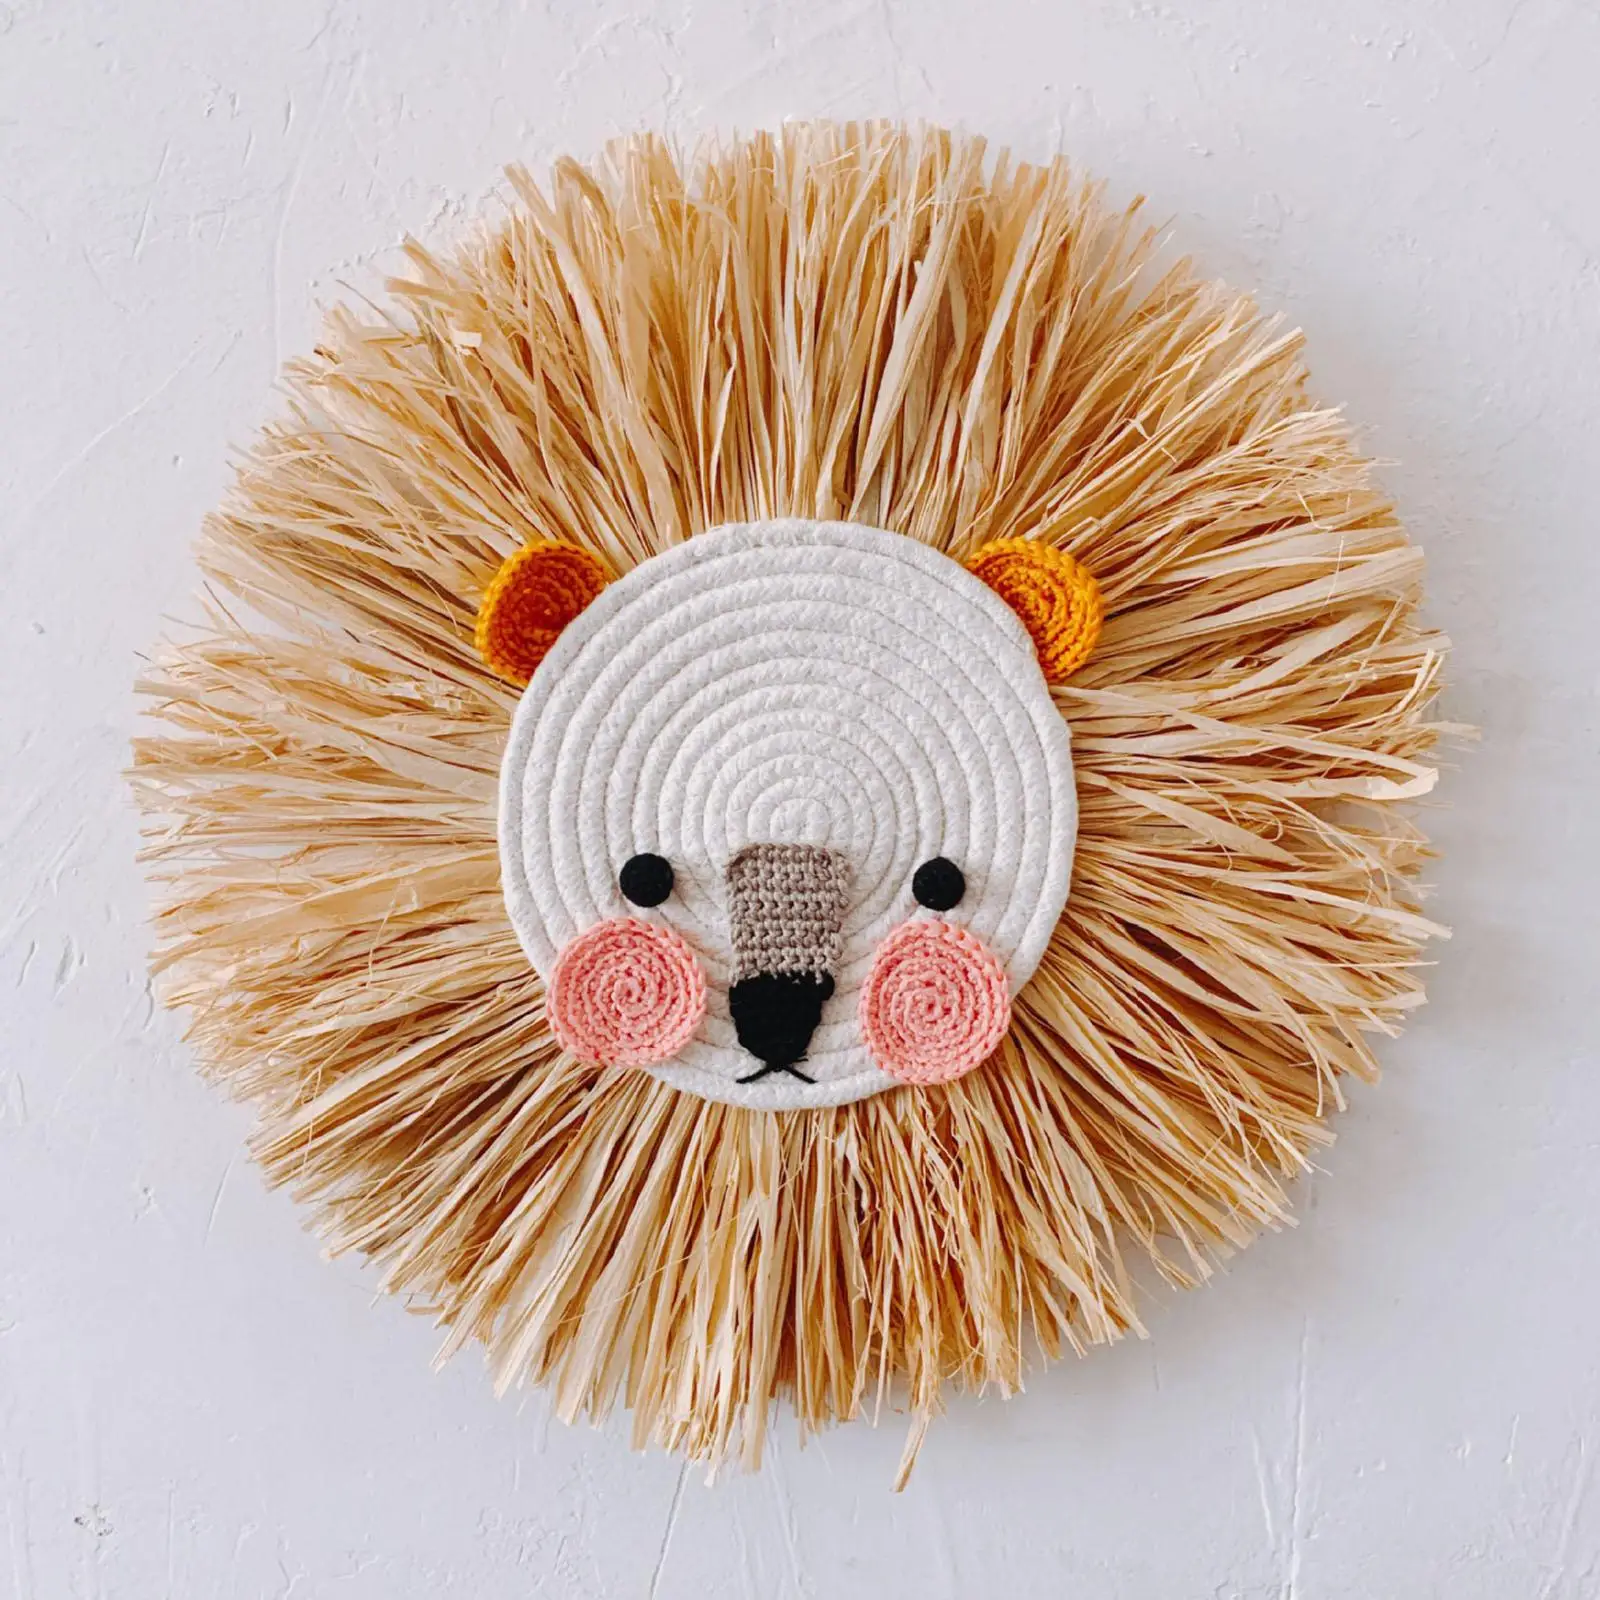 Straw Wall Hanging Tapestry Rattan Animal Cartoon Rural Woven Nordic Home 3D